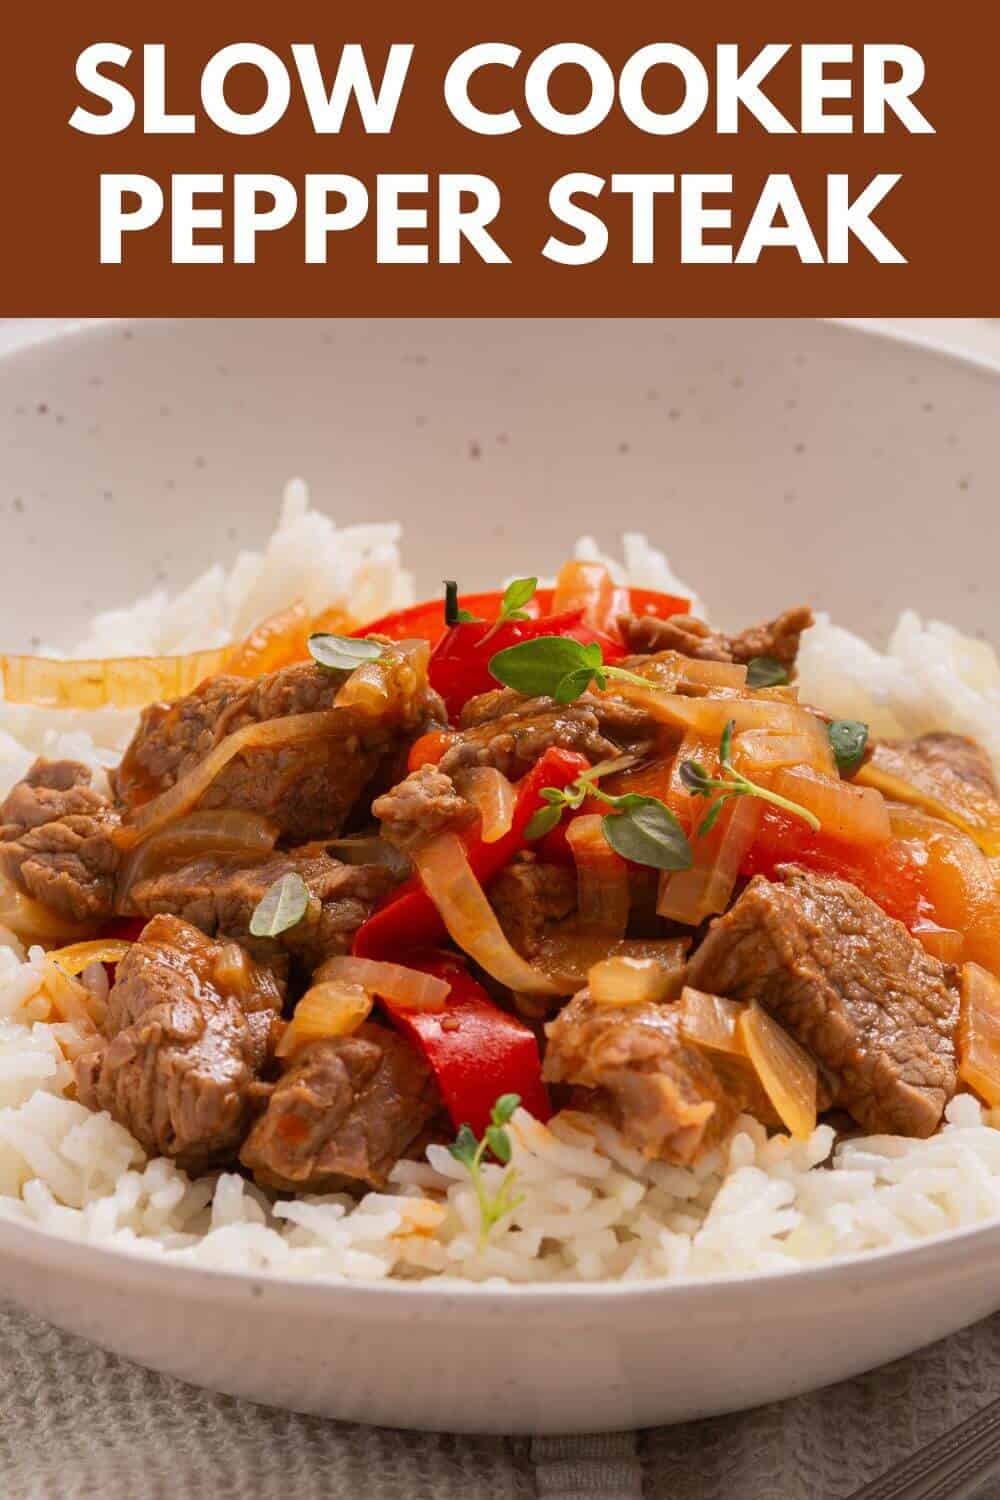 Slow cooker pepper steak with rice and peppers.